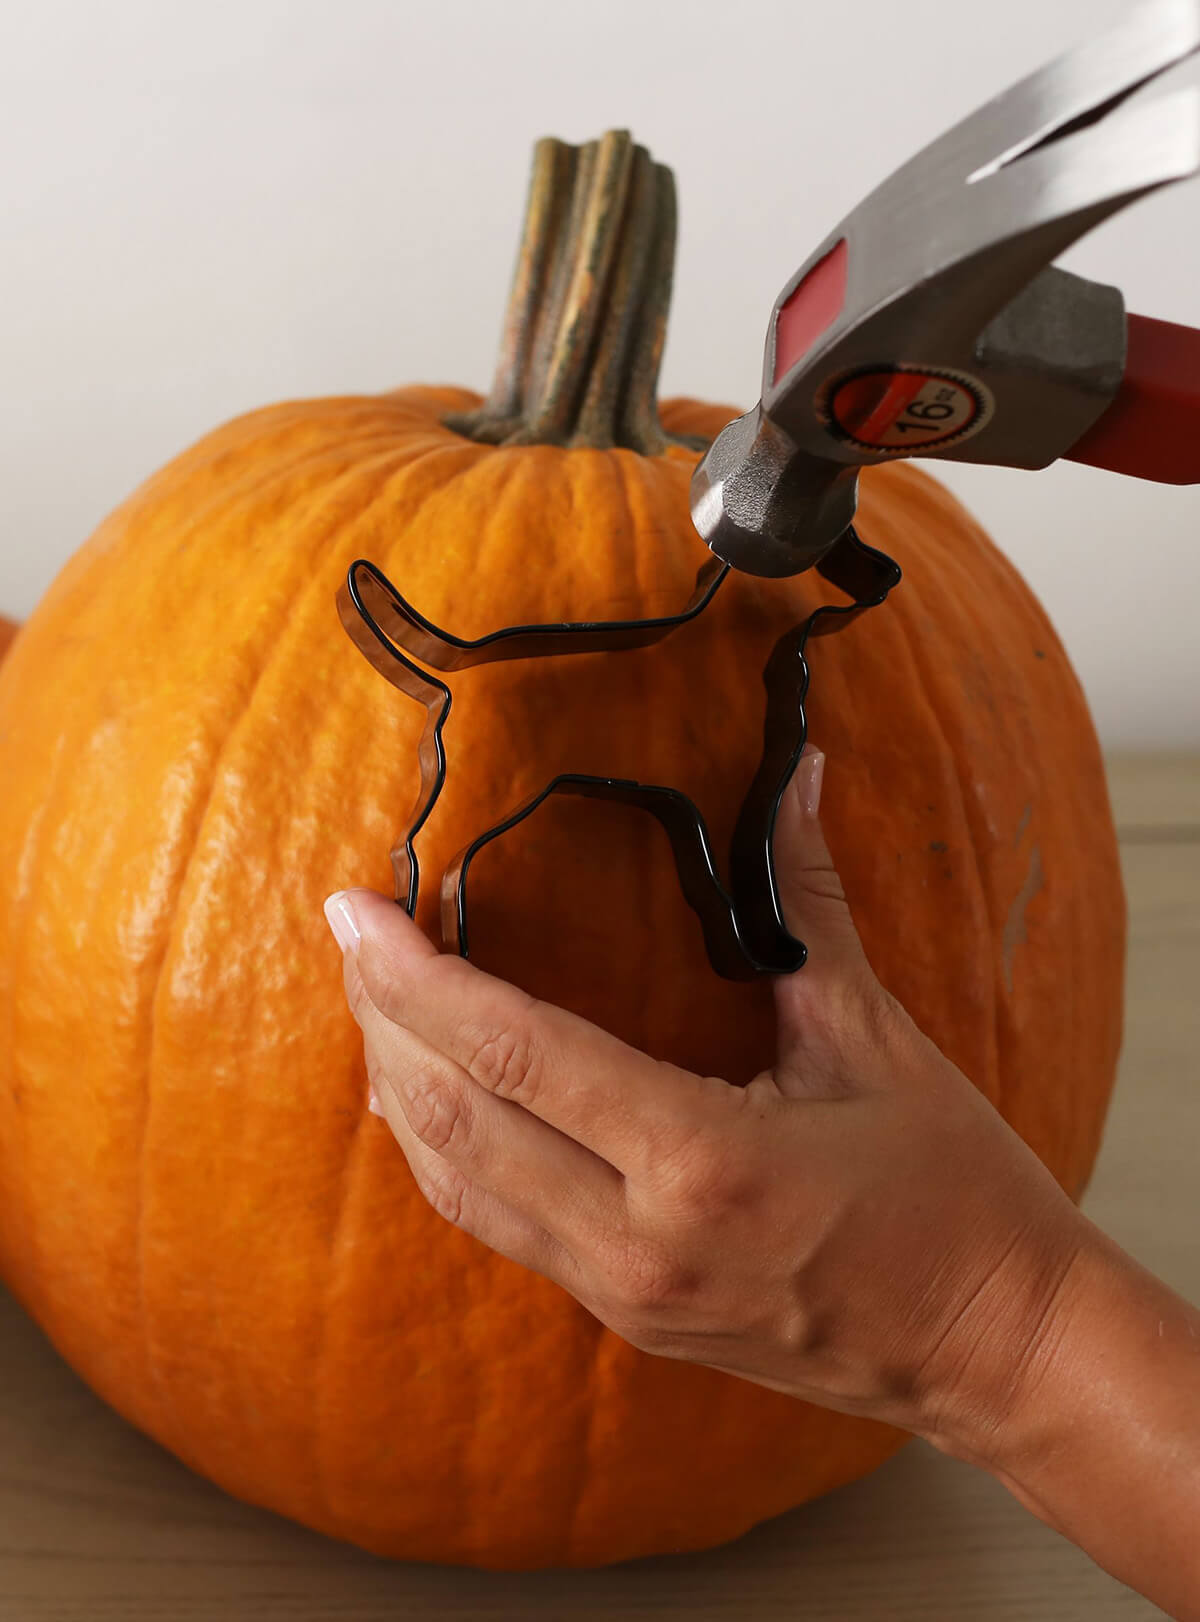 53-best-pumpkin-carving-ideas-and-designs-for-2020